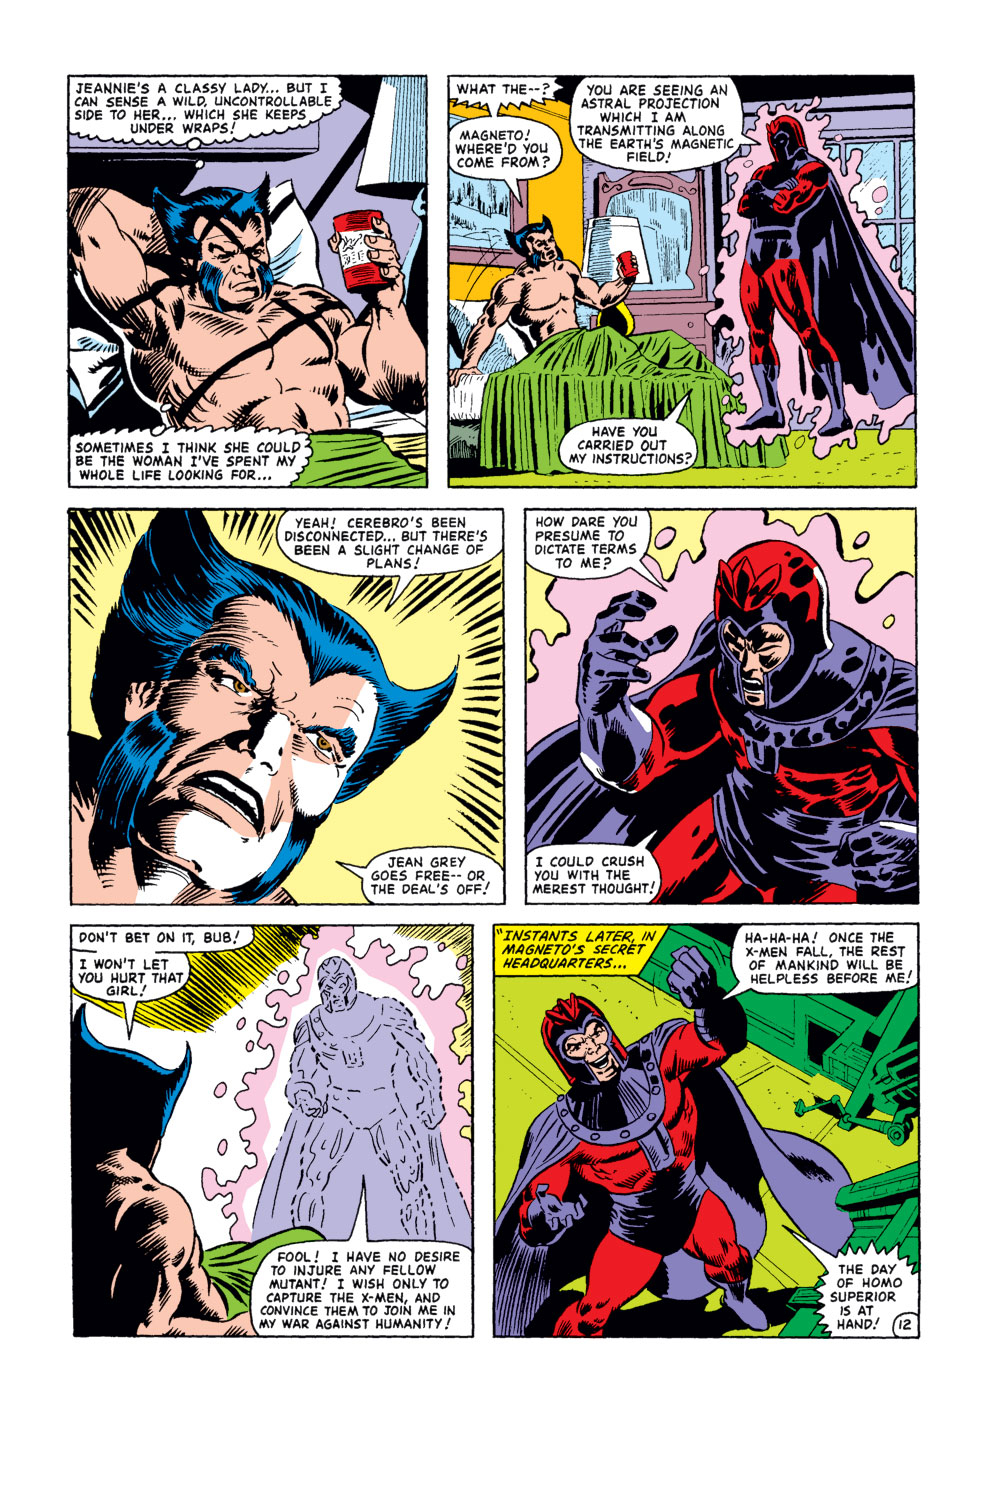 What If? (1977) issue 31 - Wolverine had killed the Hulk - Page 13